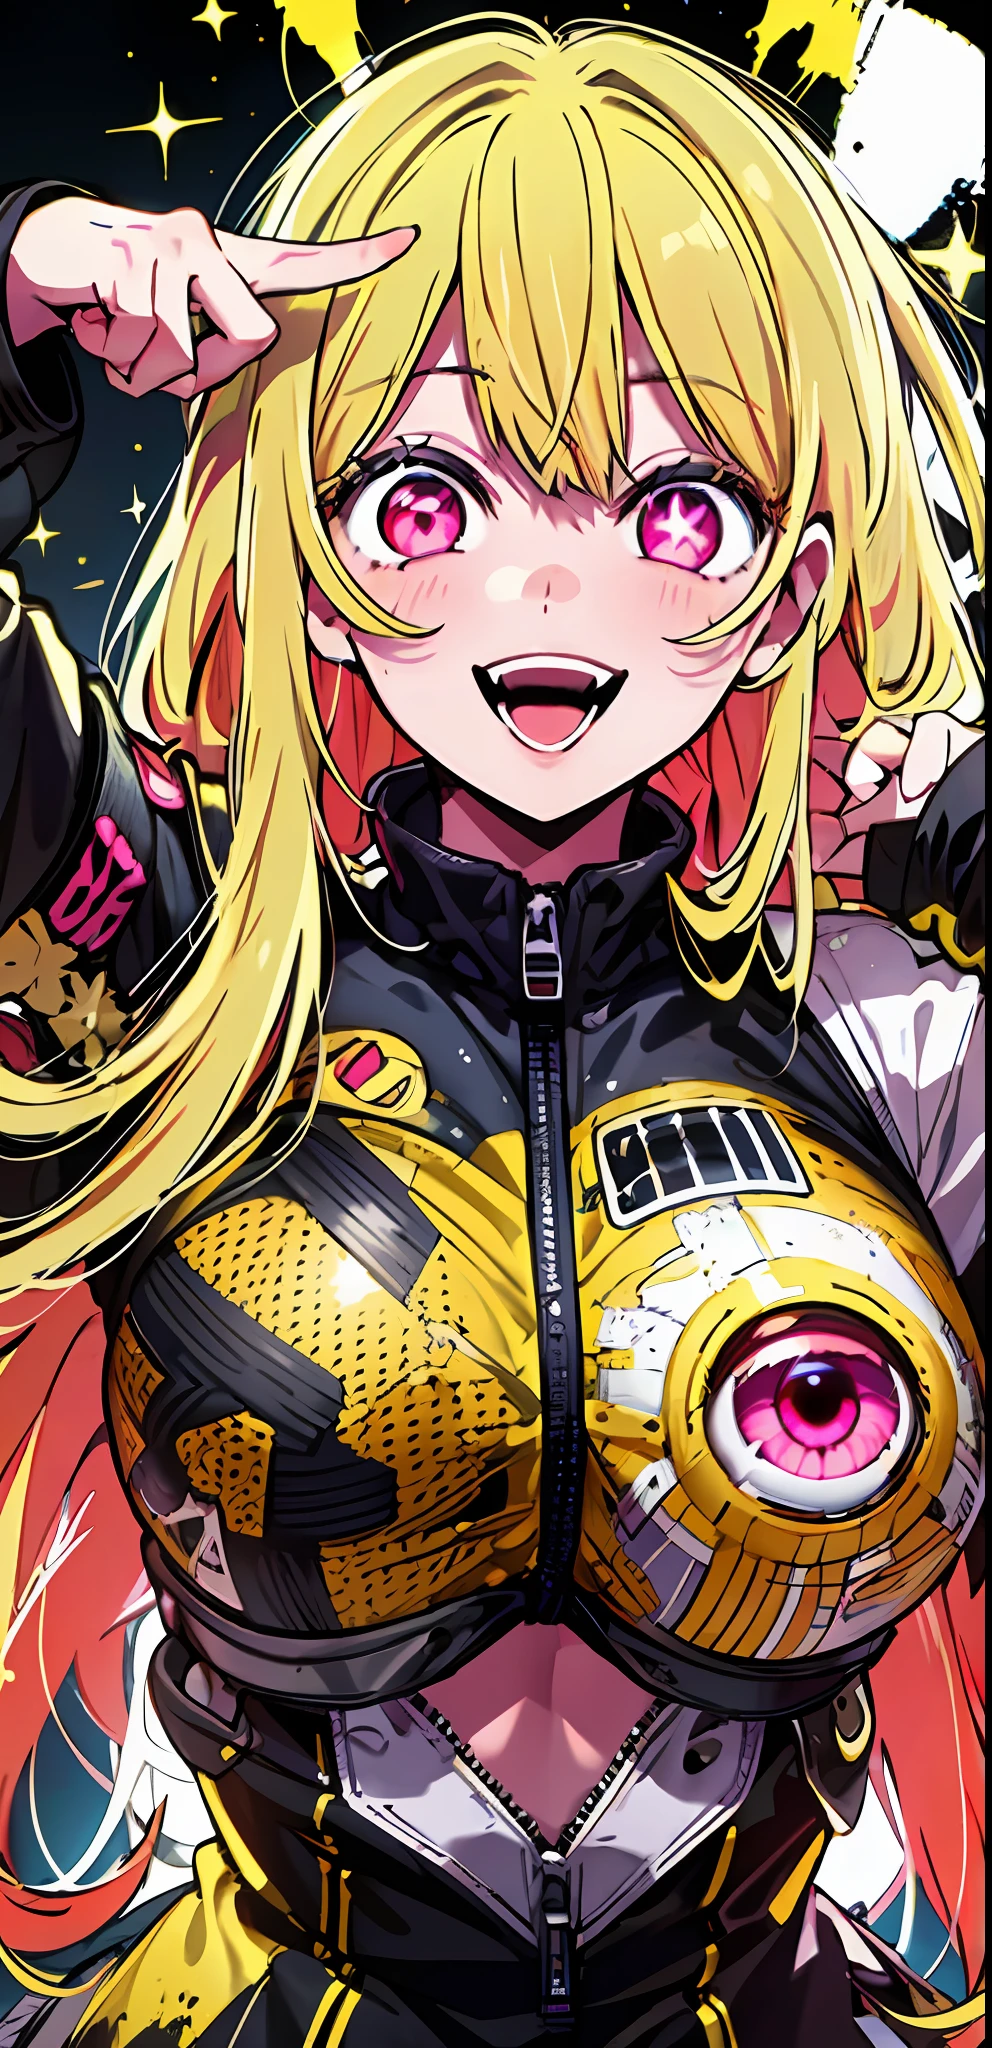 original character , 1girl, (crazy smile:1.2) ,  blonde hair , bangs , crazy eyes , hands on face , yellow blood splatter on face , yellow and black color scheme, open mouth, (wide-eyed:1.2), glowing eyes, left star shaped eye, star shaped eye,  pink eyes, pink eyes